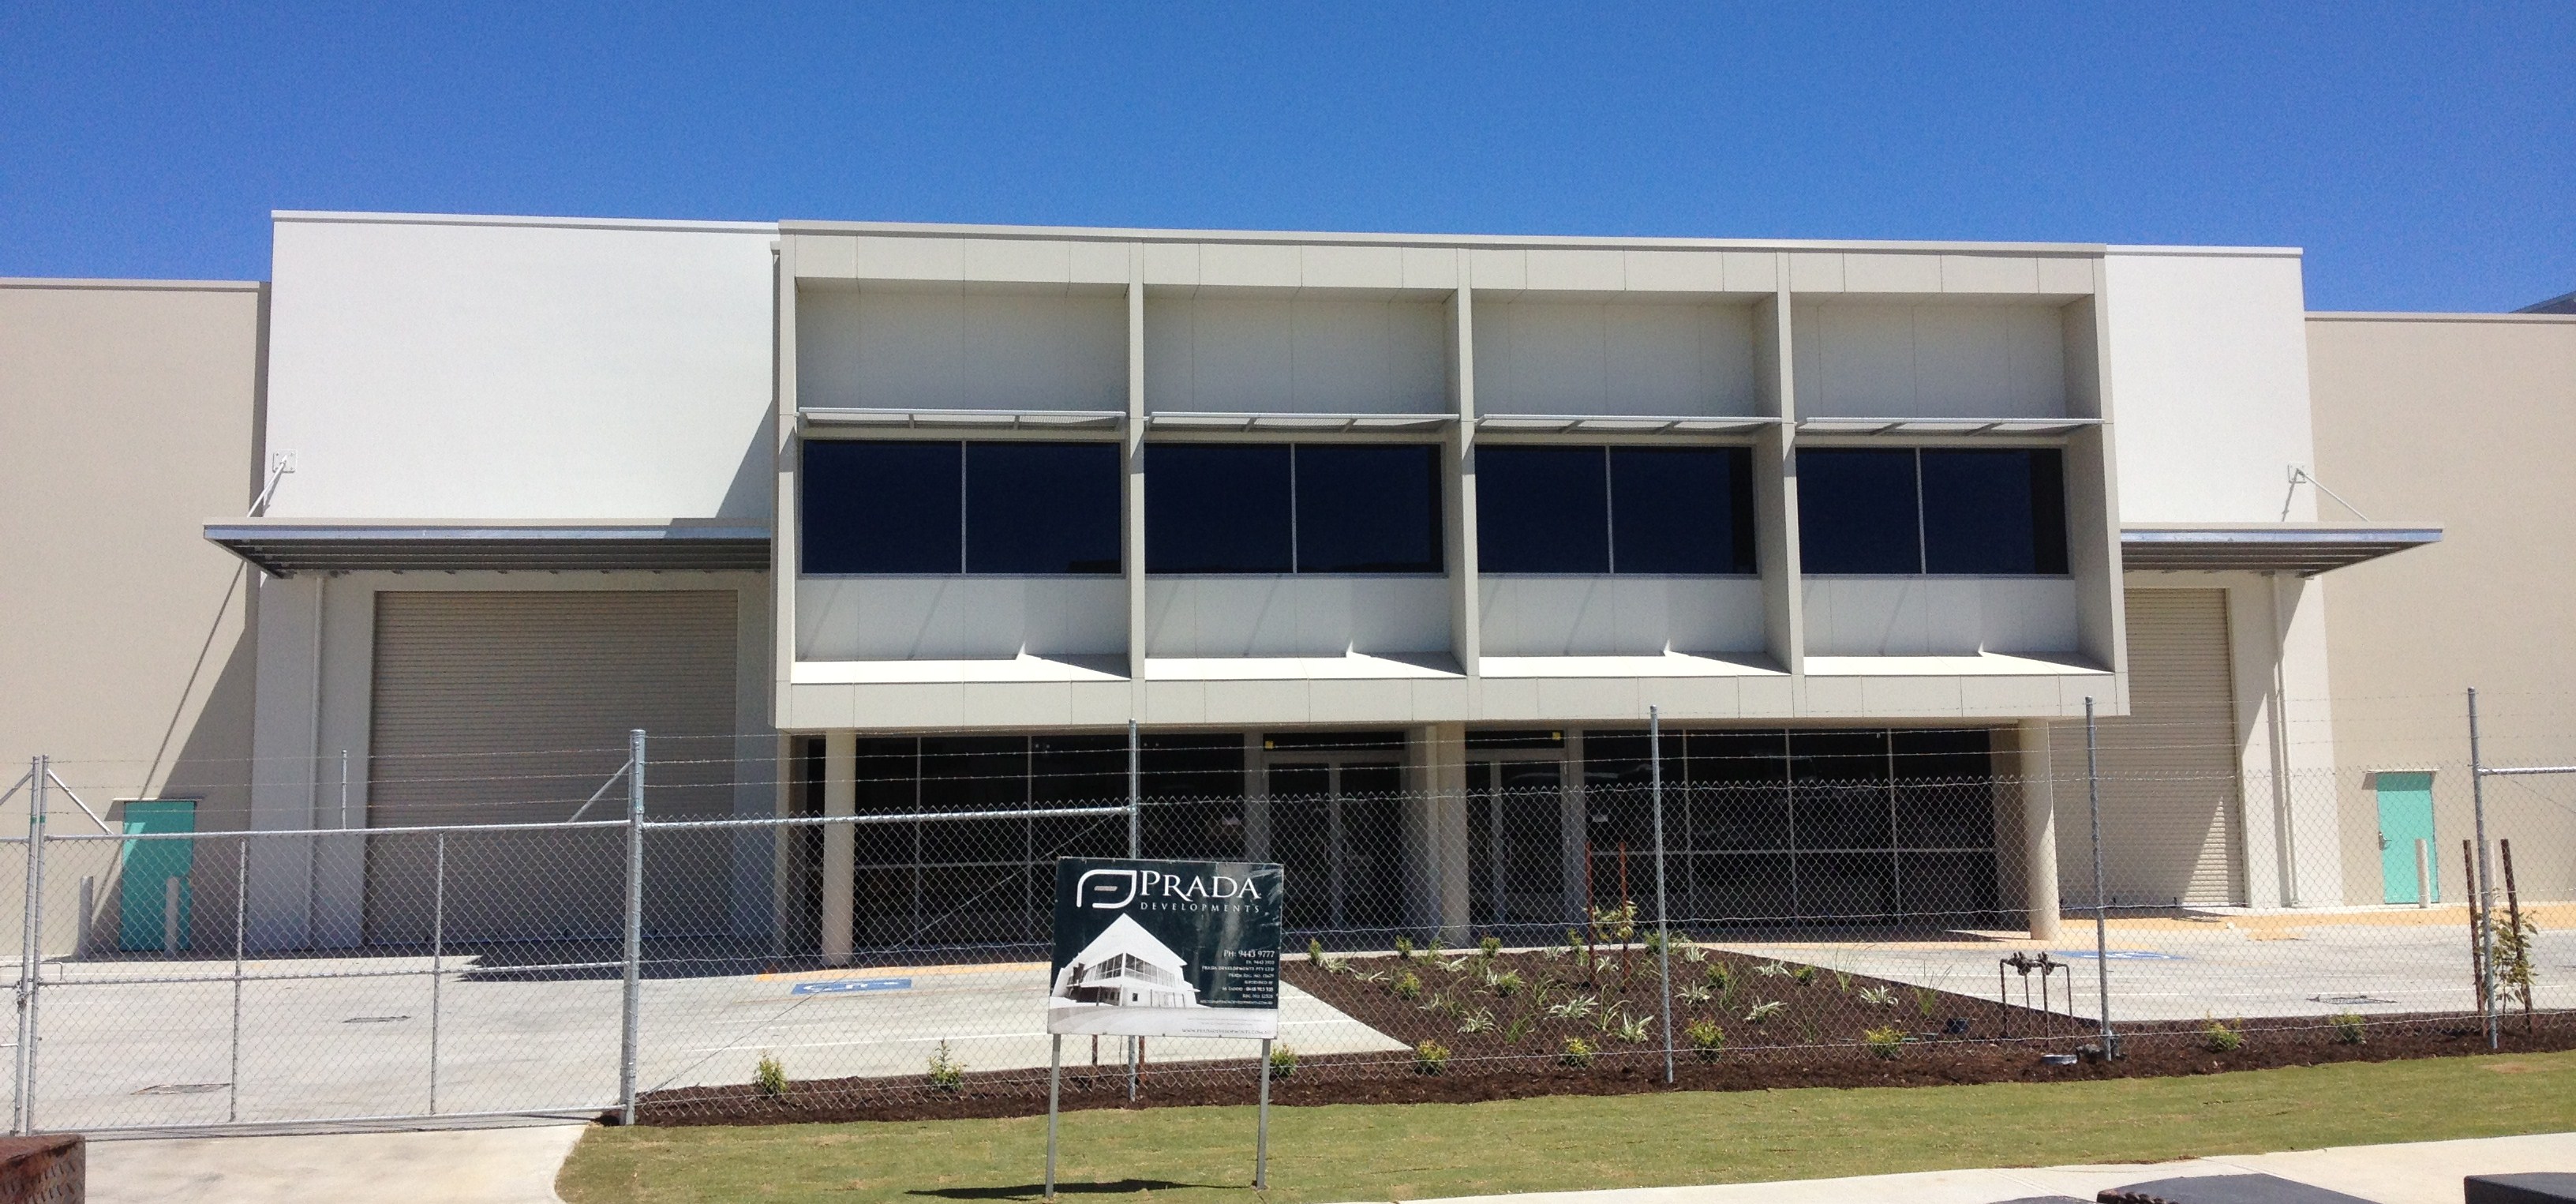 Exterior shot of large commercial warehouse office painted in cream and surrounded by a wire fence